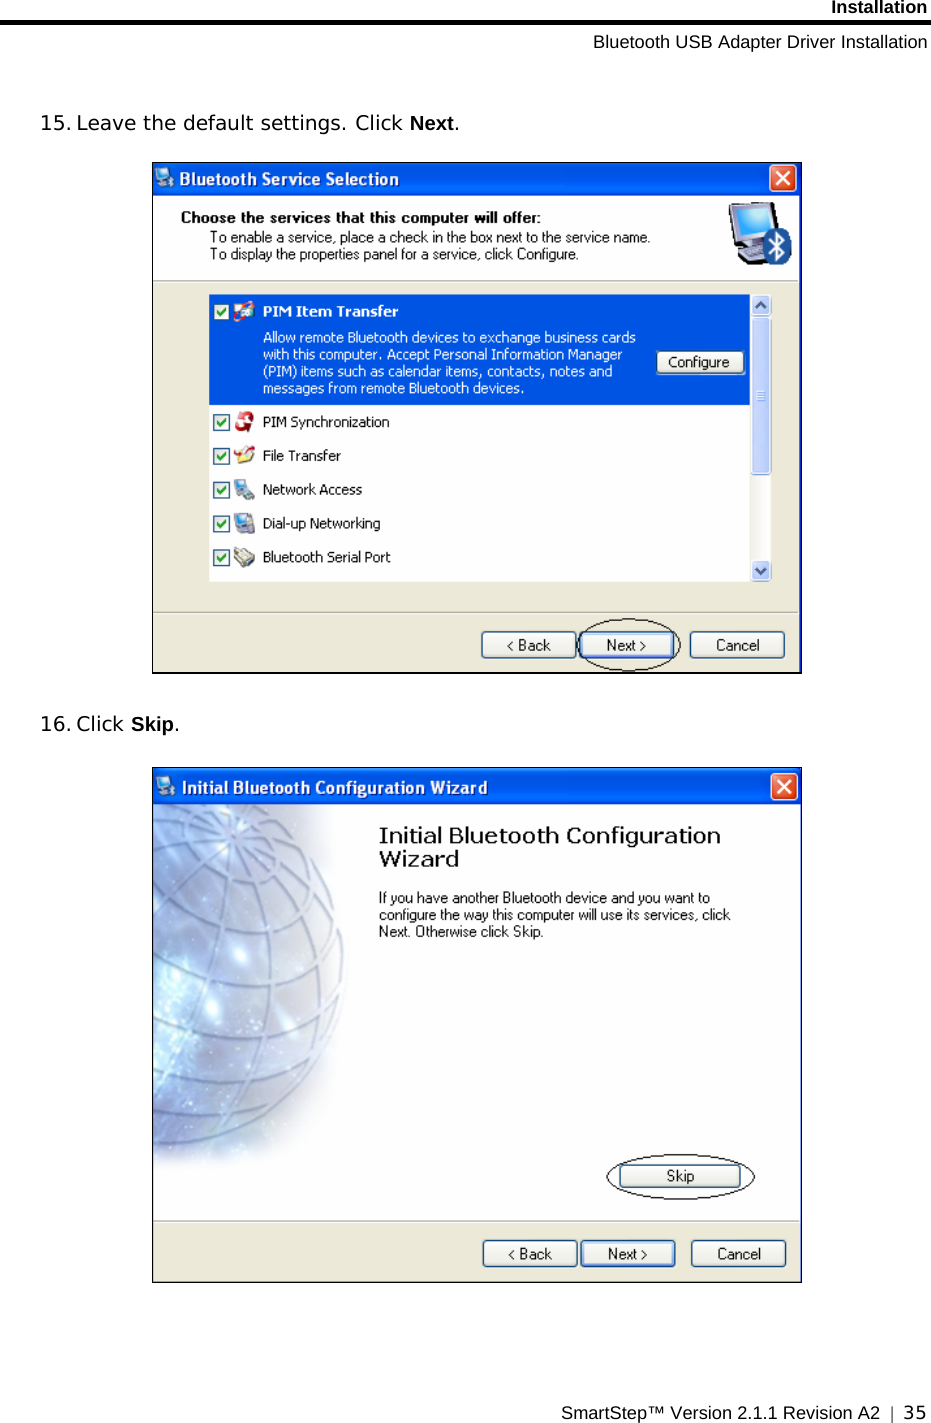 Installation Bluetooth USB Adapter Driver Installation SmartStep™ Version 2.1.1 Revision A2  |  35   15. Leave the default settings. Click Next.    16. Click Skip.     